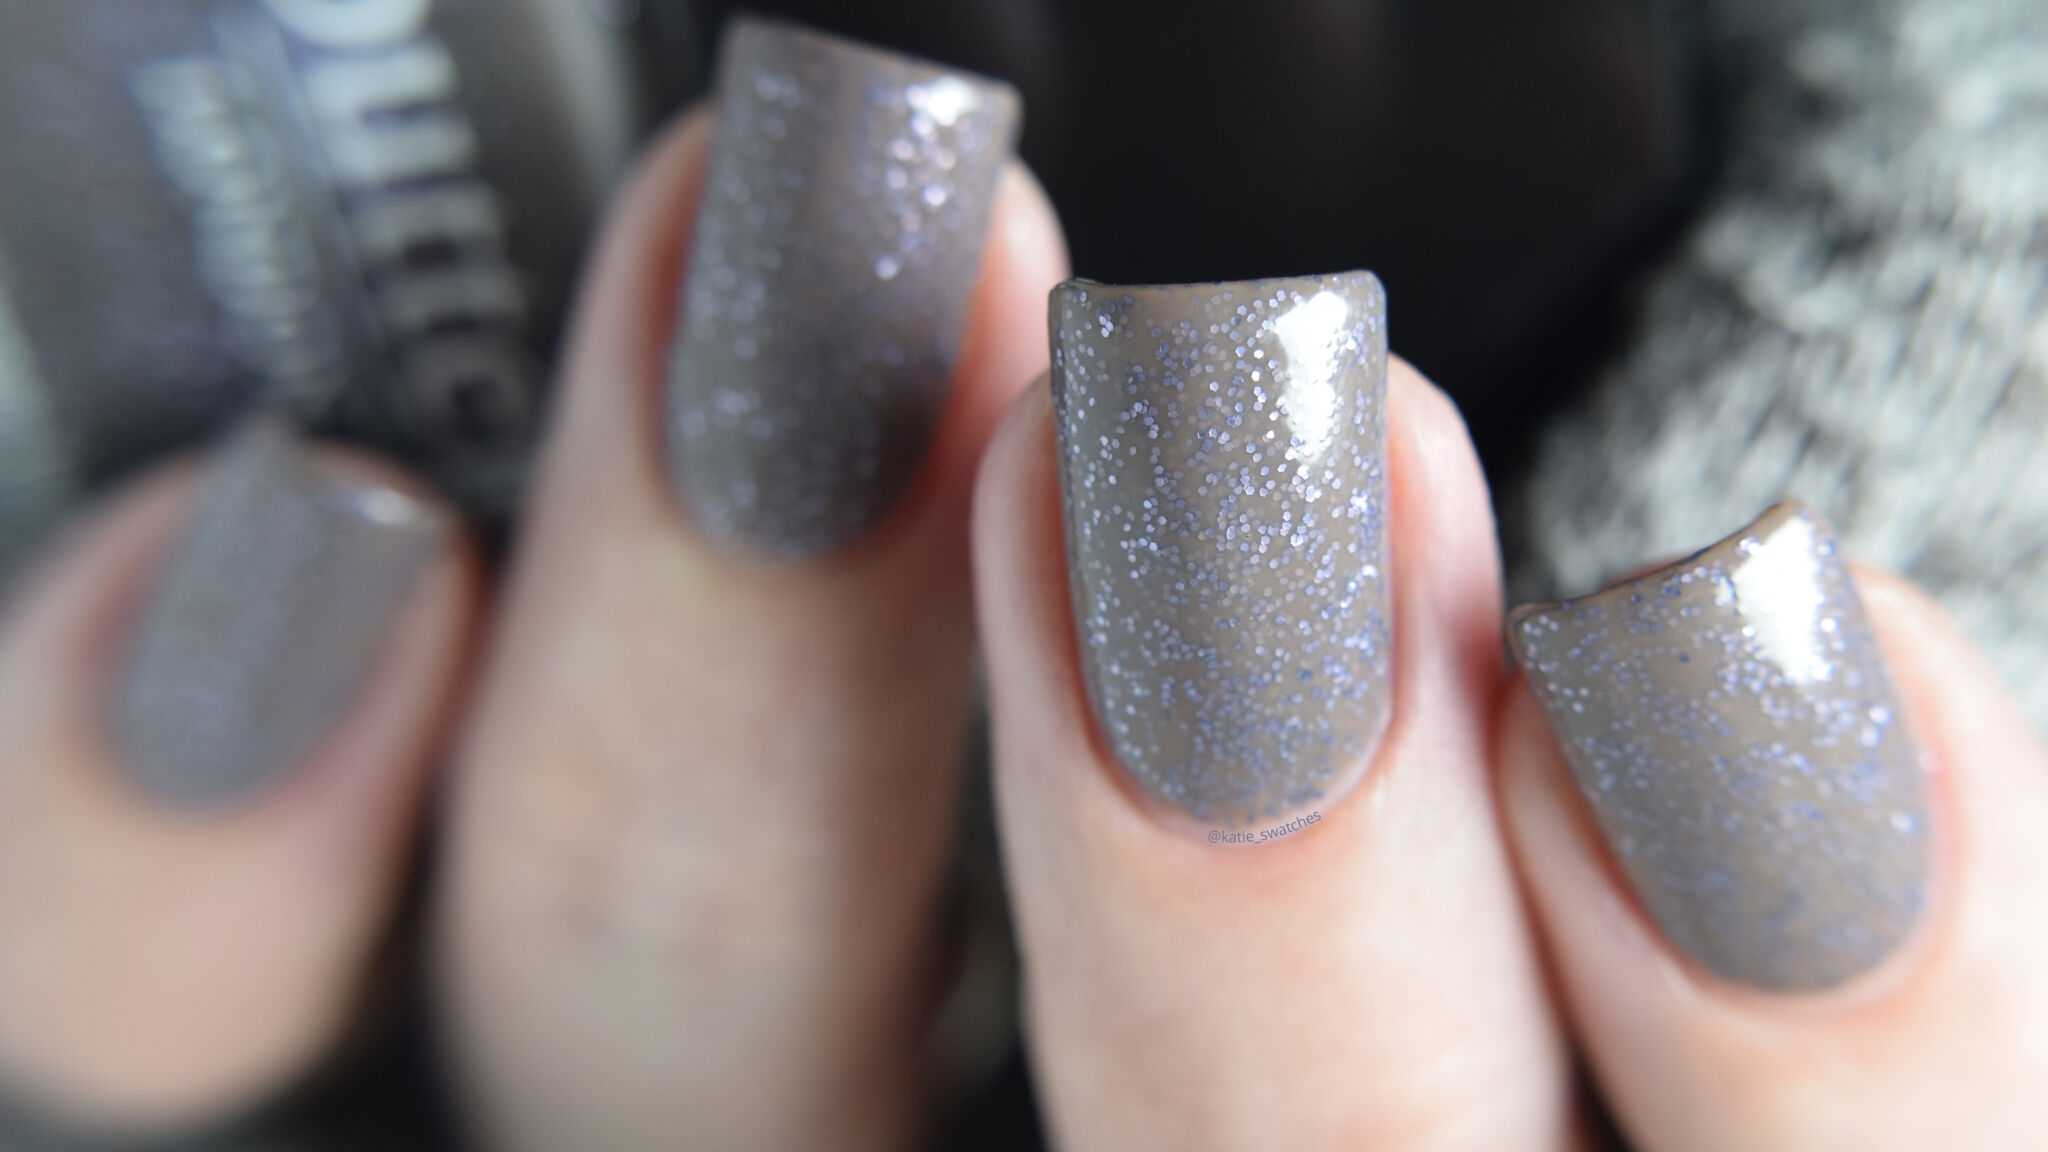 butter LONDON No More Waity, Katie nail polish swatch - taupe grey nail polish with tiny blue glitters